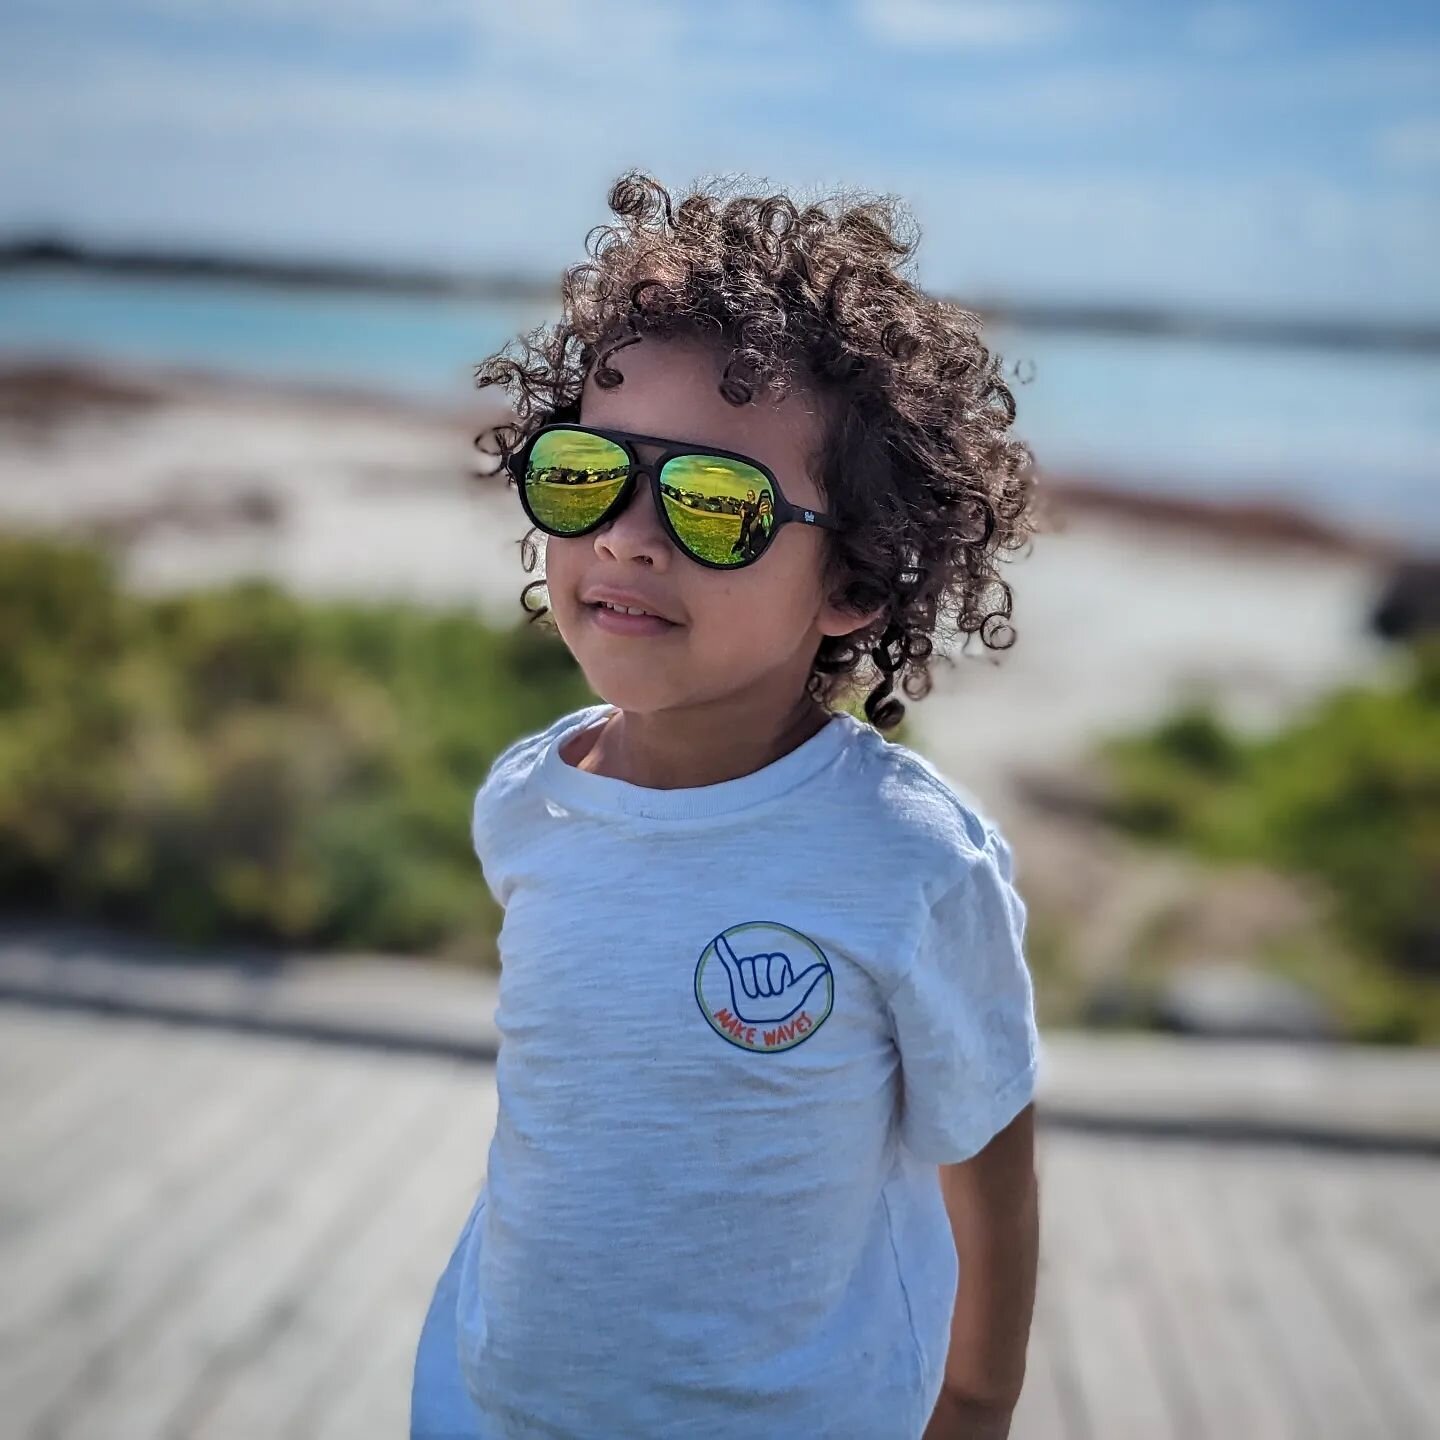 Get ready to be jealous, folks! This adorable little guy knows how to rock the perfect beachy curls and shades combo like a super⭐
@kylie_storer4
.
.
.
#rookieandco #belittledreambig #kidssunglasses #kids #sunglasses #beach #curls #gifts